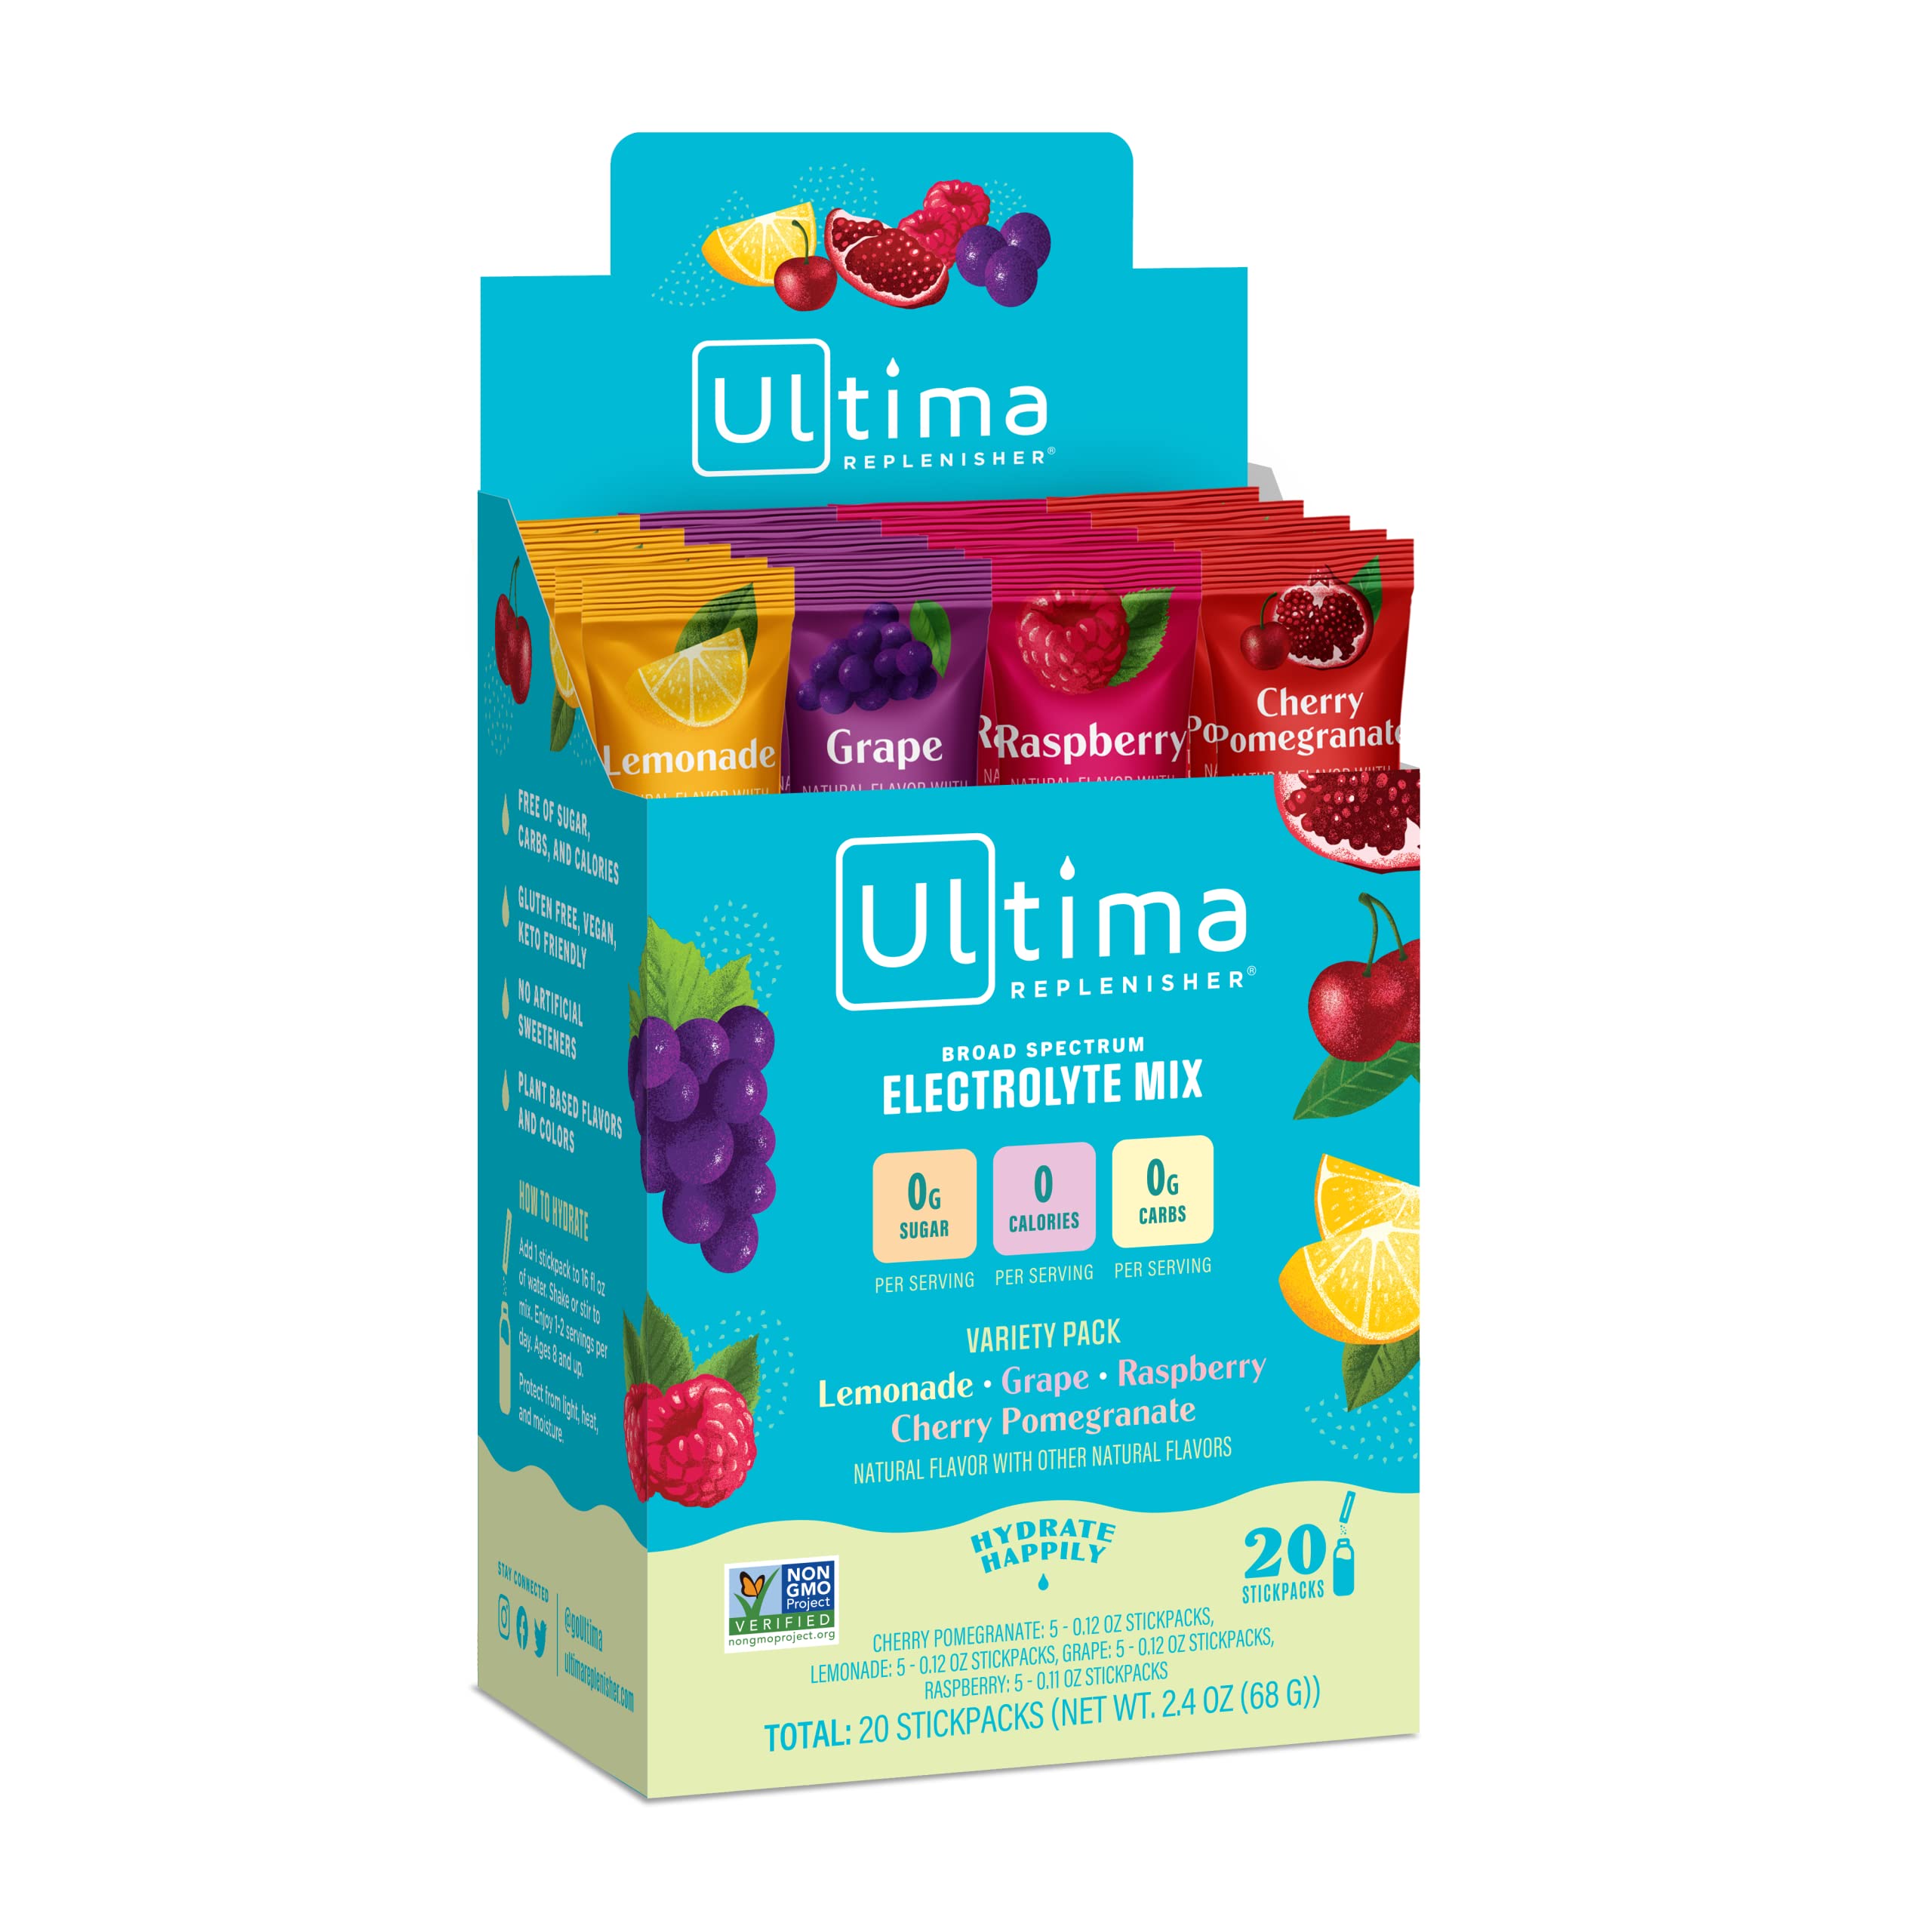 Ultima Replenisher Electrolyte Hydration Powder, Variety 4 Flavor Pack, 20 Count Stickpacks Box - Sugar Free, 0 Calories, 0 Carbs - Gluten-Free, Keto, Non-GMO with Magnesium, Potassium